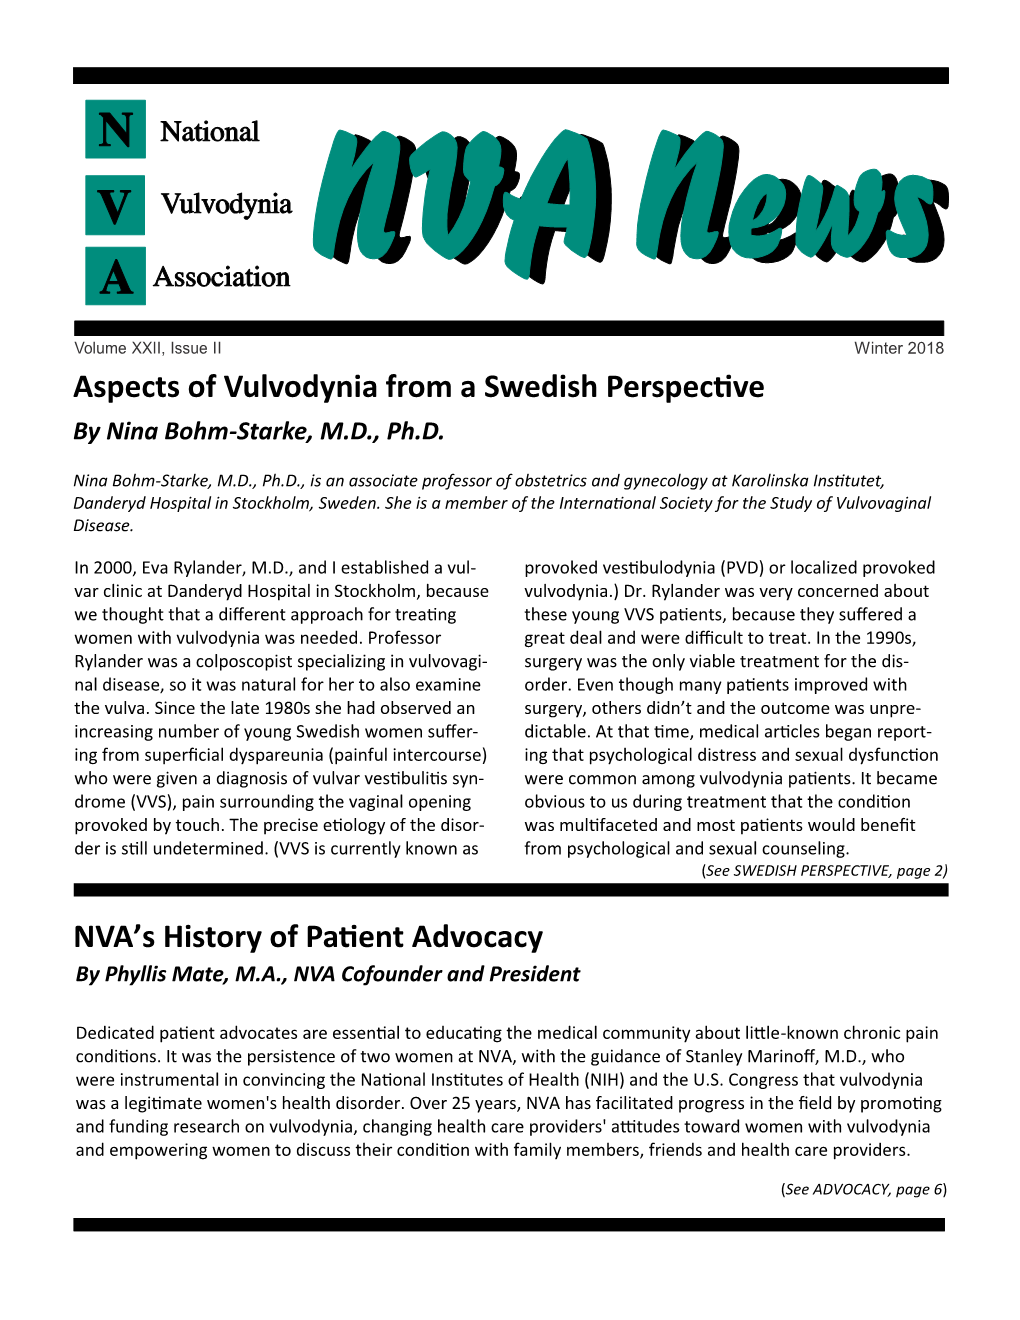 Aspects of Vulvodynia from a Swedish Perspective NVA's History Of